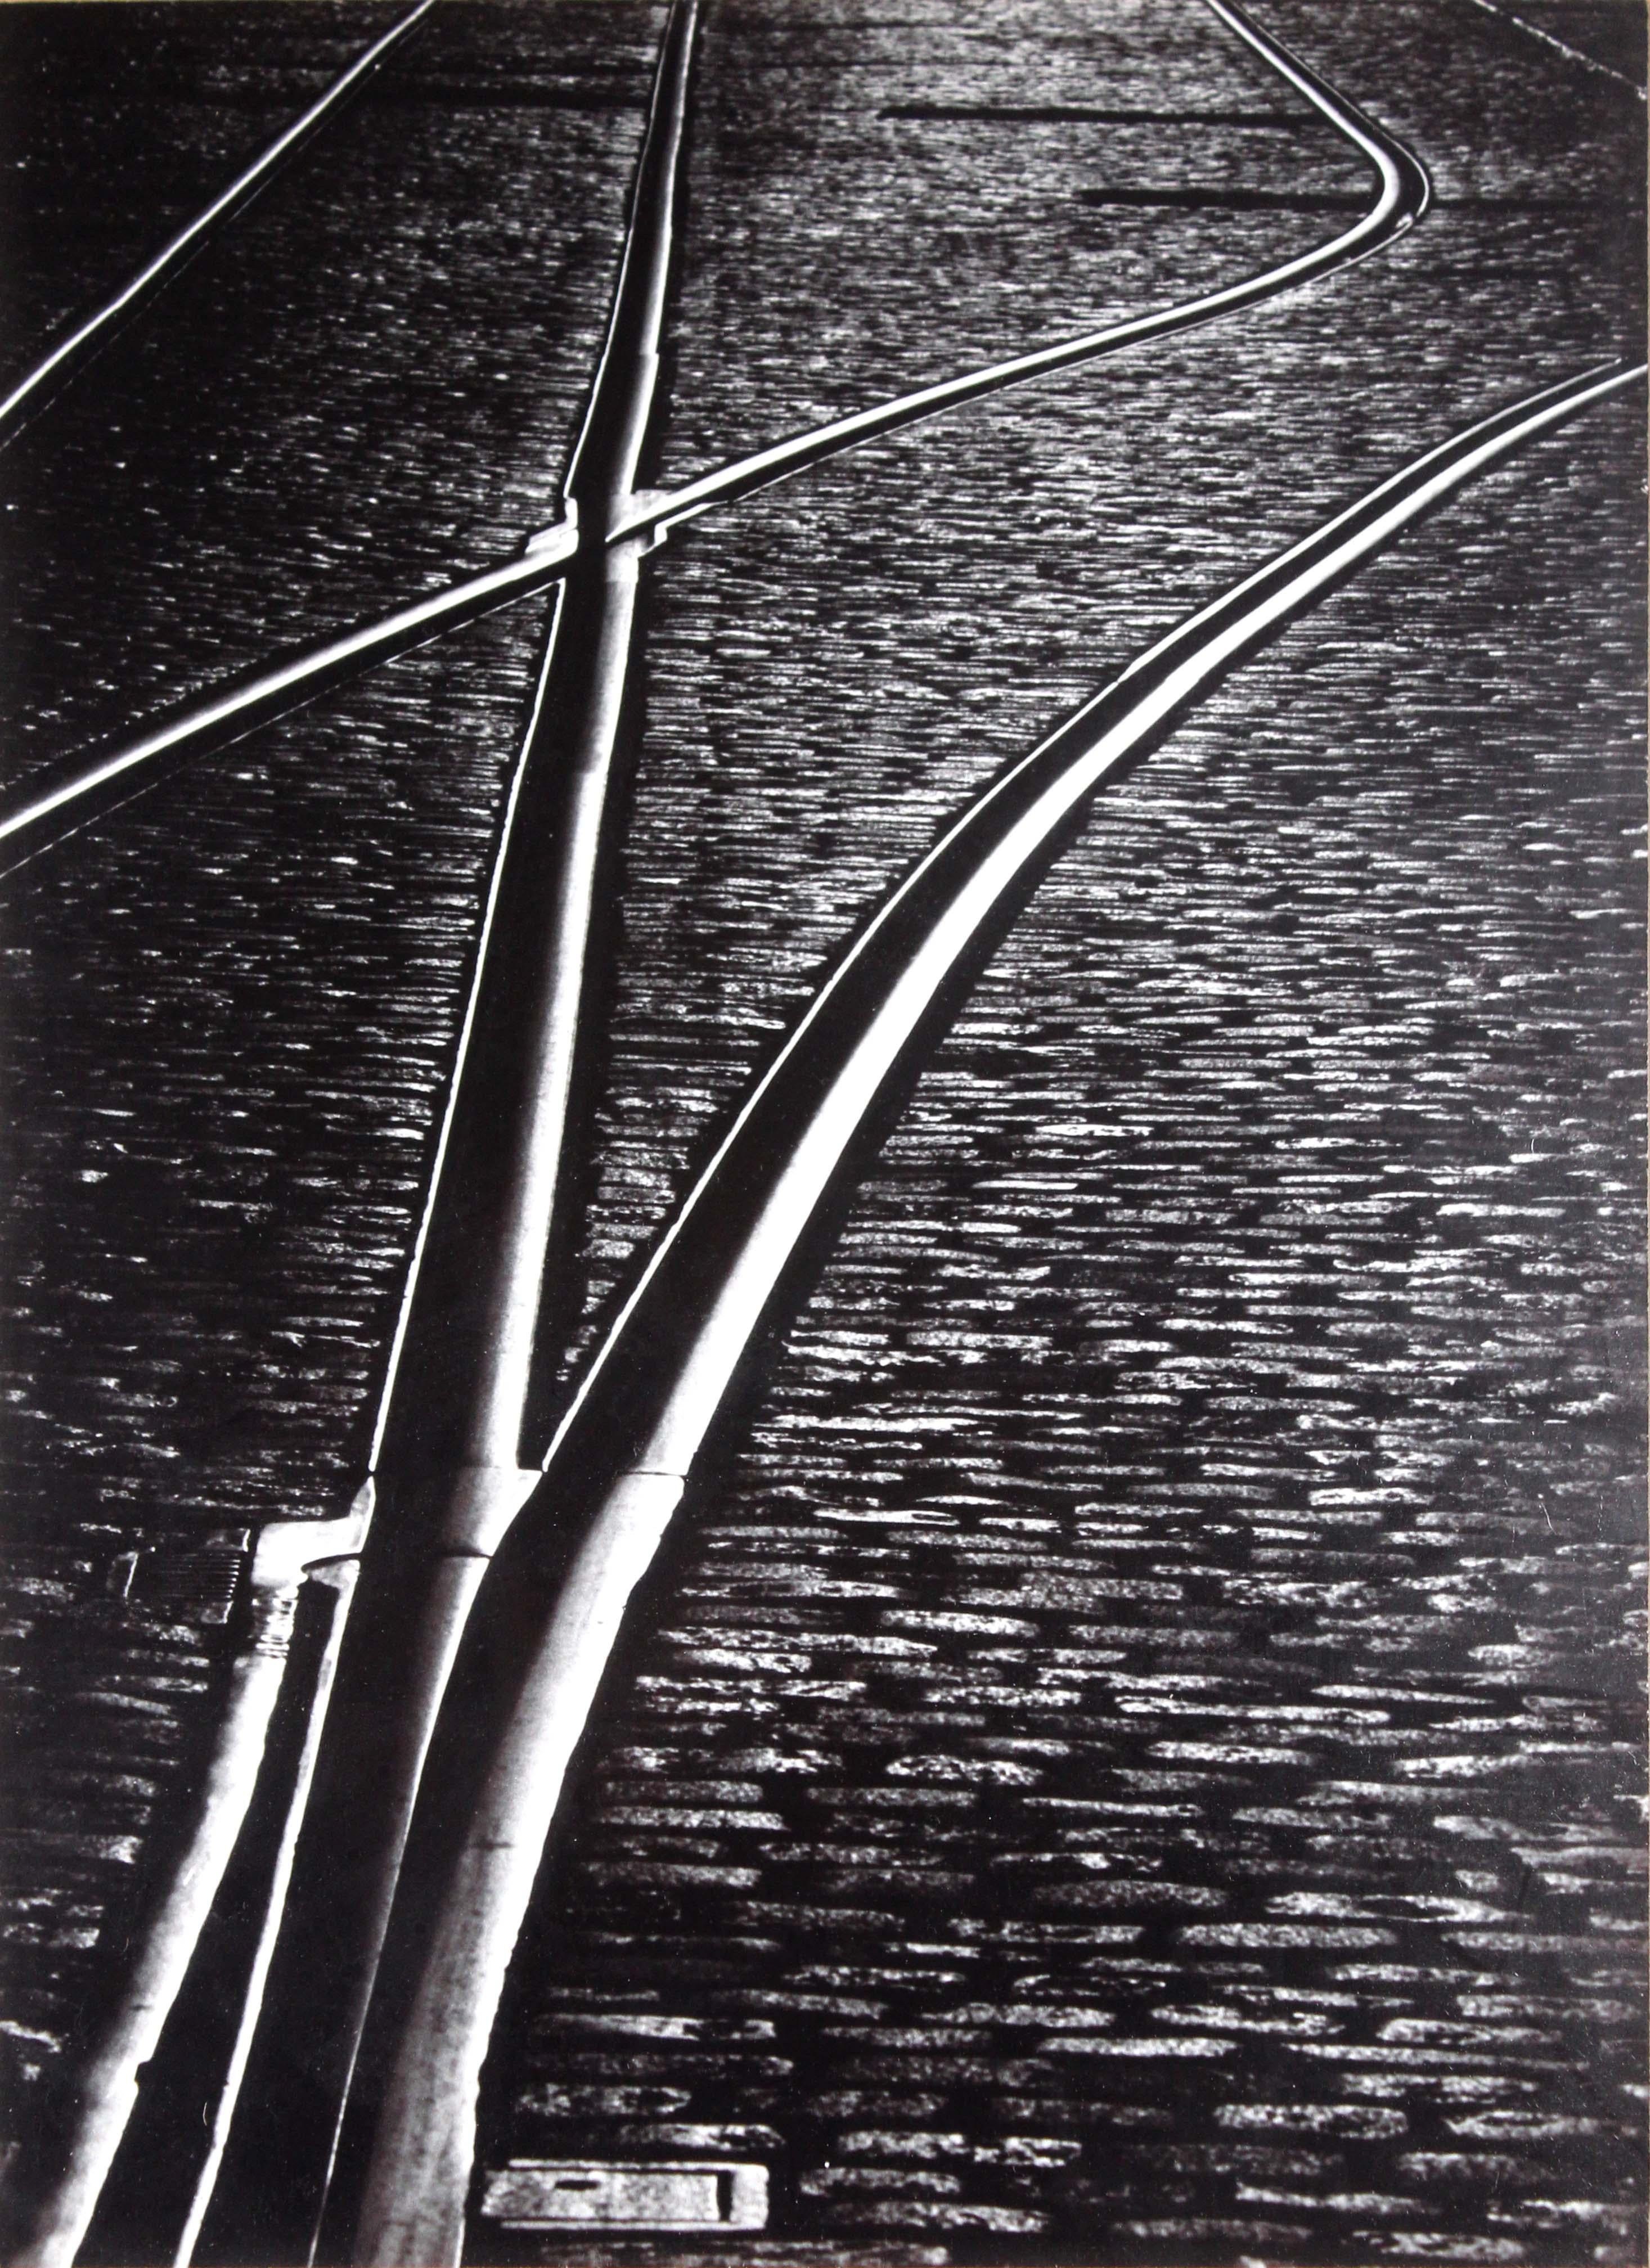 An ethereal silver gelatin photograph titled “Railroad Tracks” by Otis Sparrow. Dated 1978. An elegant depiction of railroad tracks via an aerial view. Provenance: This photograph was part of a collection of a seasoned art expert who amassed an